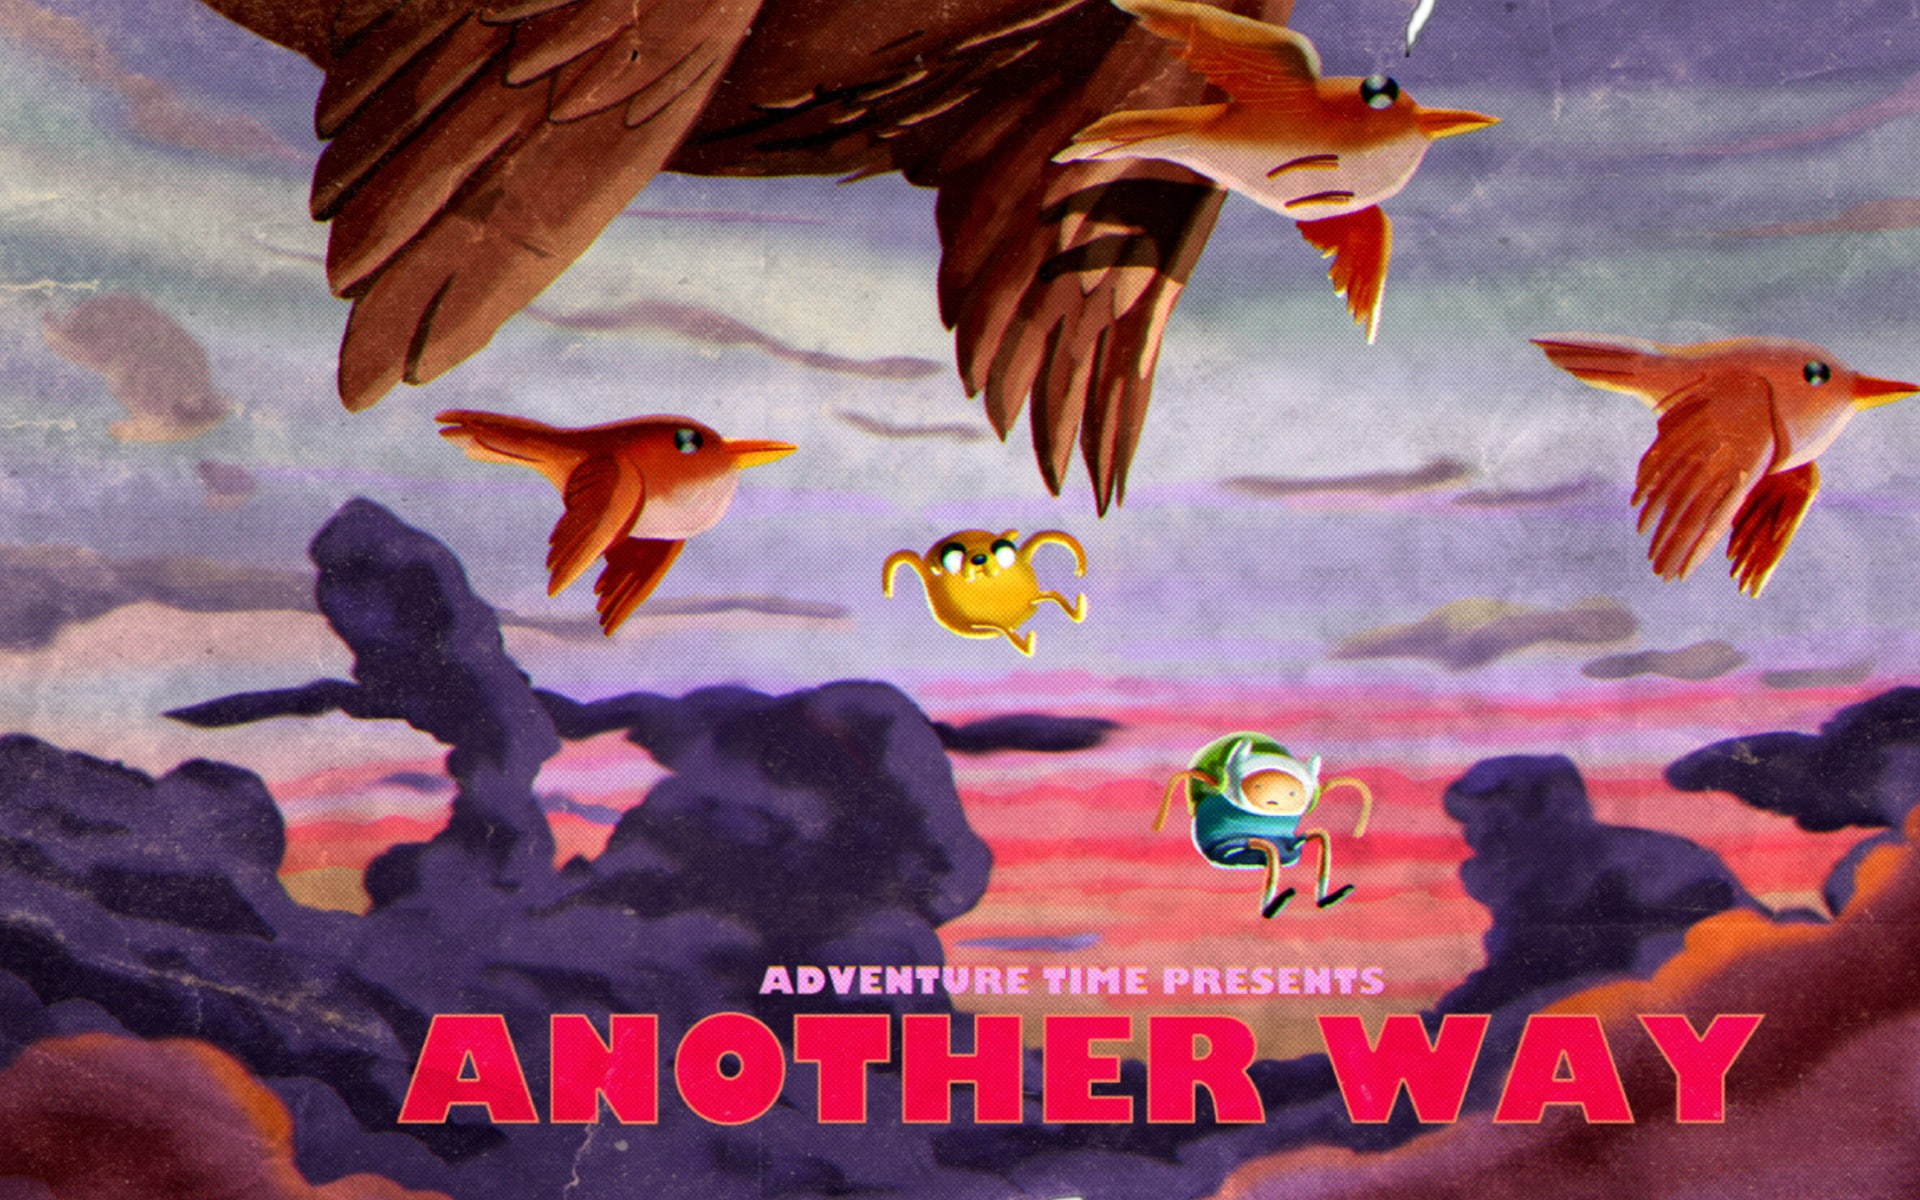 Adventure Time HD, adventure time presents another way poster